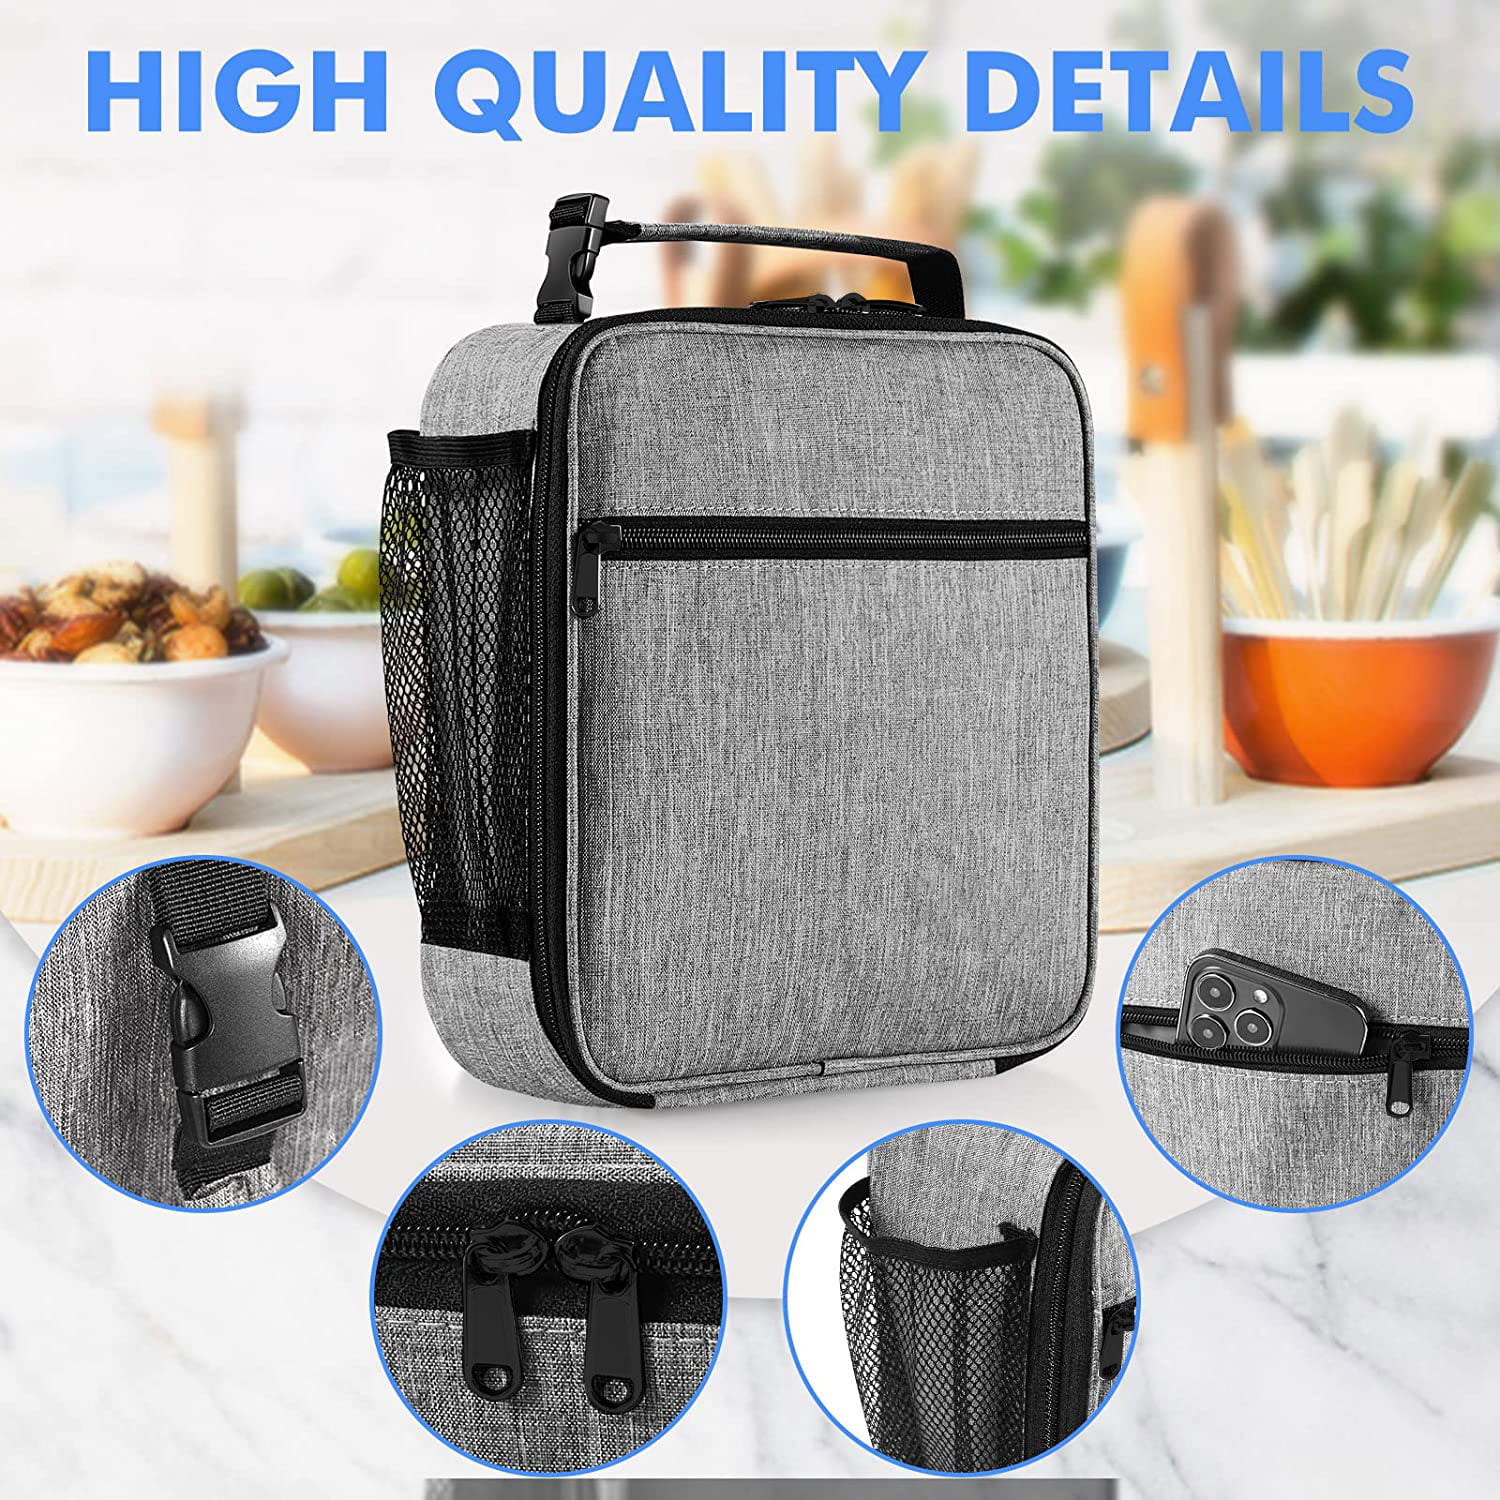 Xmmswdla Children's Lunch Box, Adult Lunch Box, Work Lunch Box, Large Capacity Men's Lunch Box, Women's Leak Proof Lunch Box, Multiple Compartments